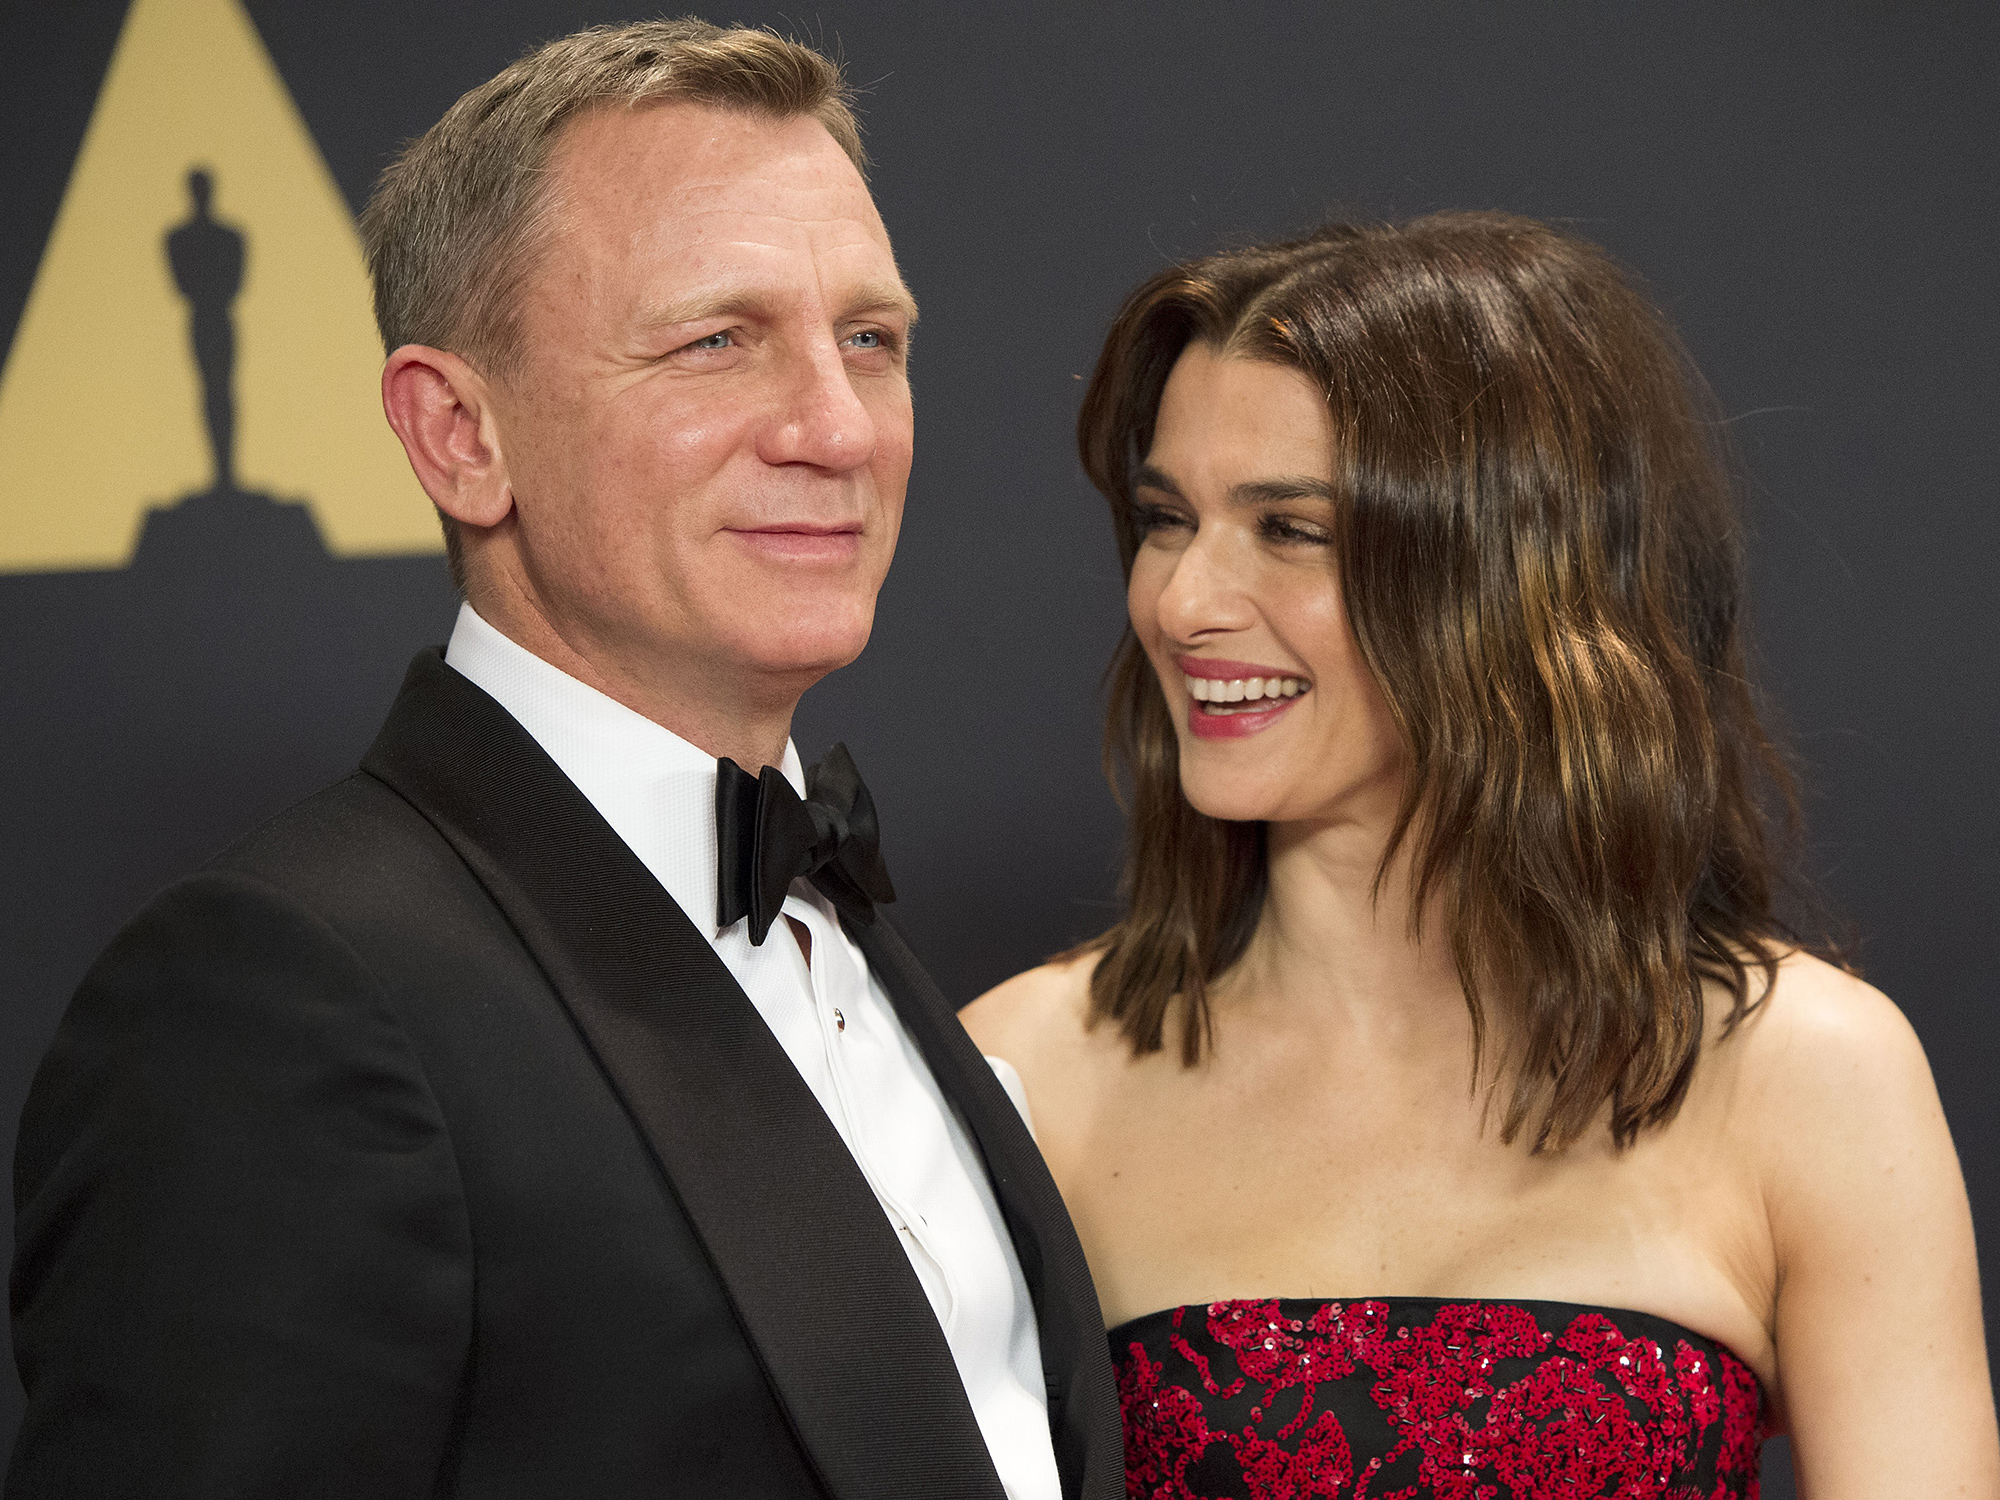 Daniel Craig (L) and Rachel Weisz attend the 7th Annual Governors Awards honoring Spike Lee, Gena Rowlands and Debbie Reynolds, in Hollywood, California, on November 14, 2015